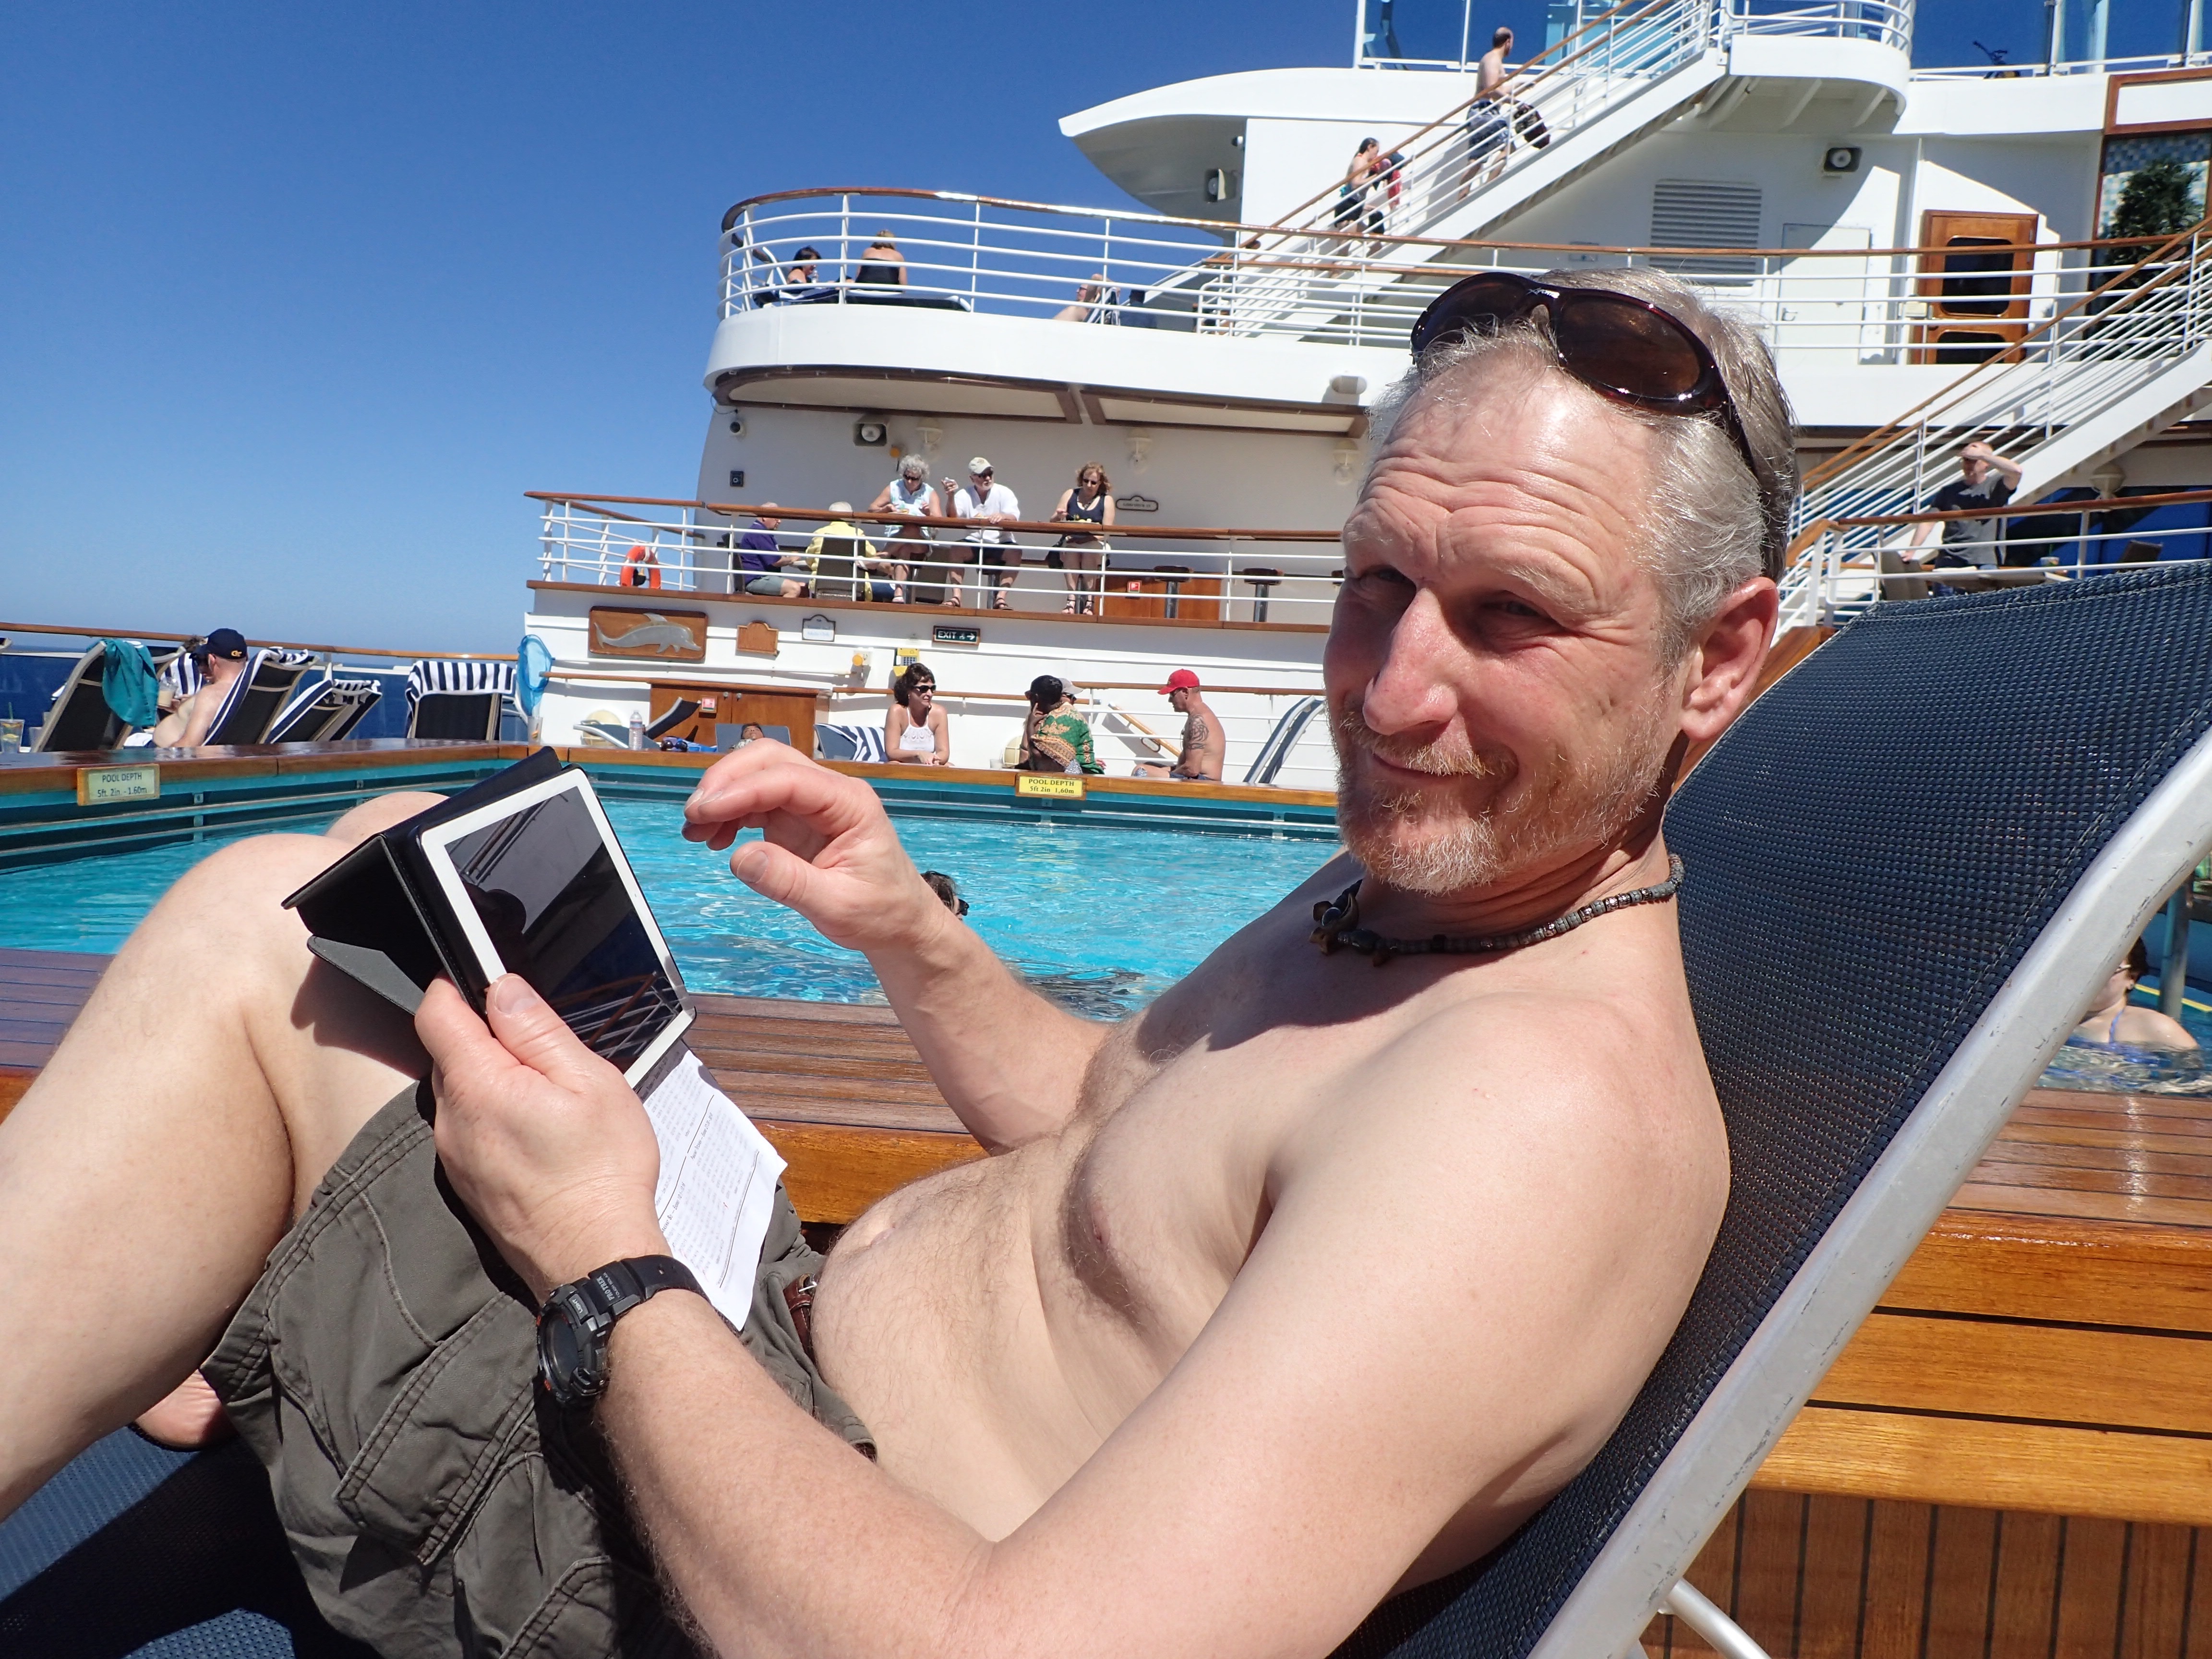 Sandi snapped this photo of me back on the ship. Yes, I'm reading my daily Scripture reading on my iPad! You can actually see the Hoshana Rabbah printed reading schedule underneath the iPad in my lap.